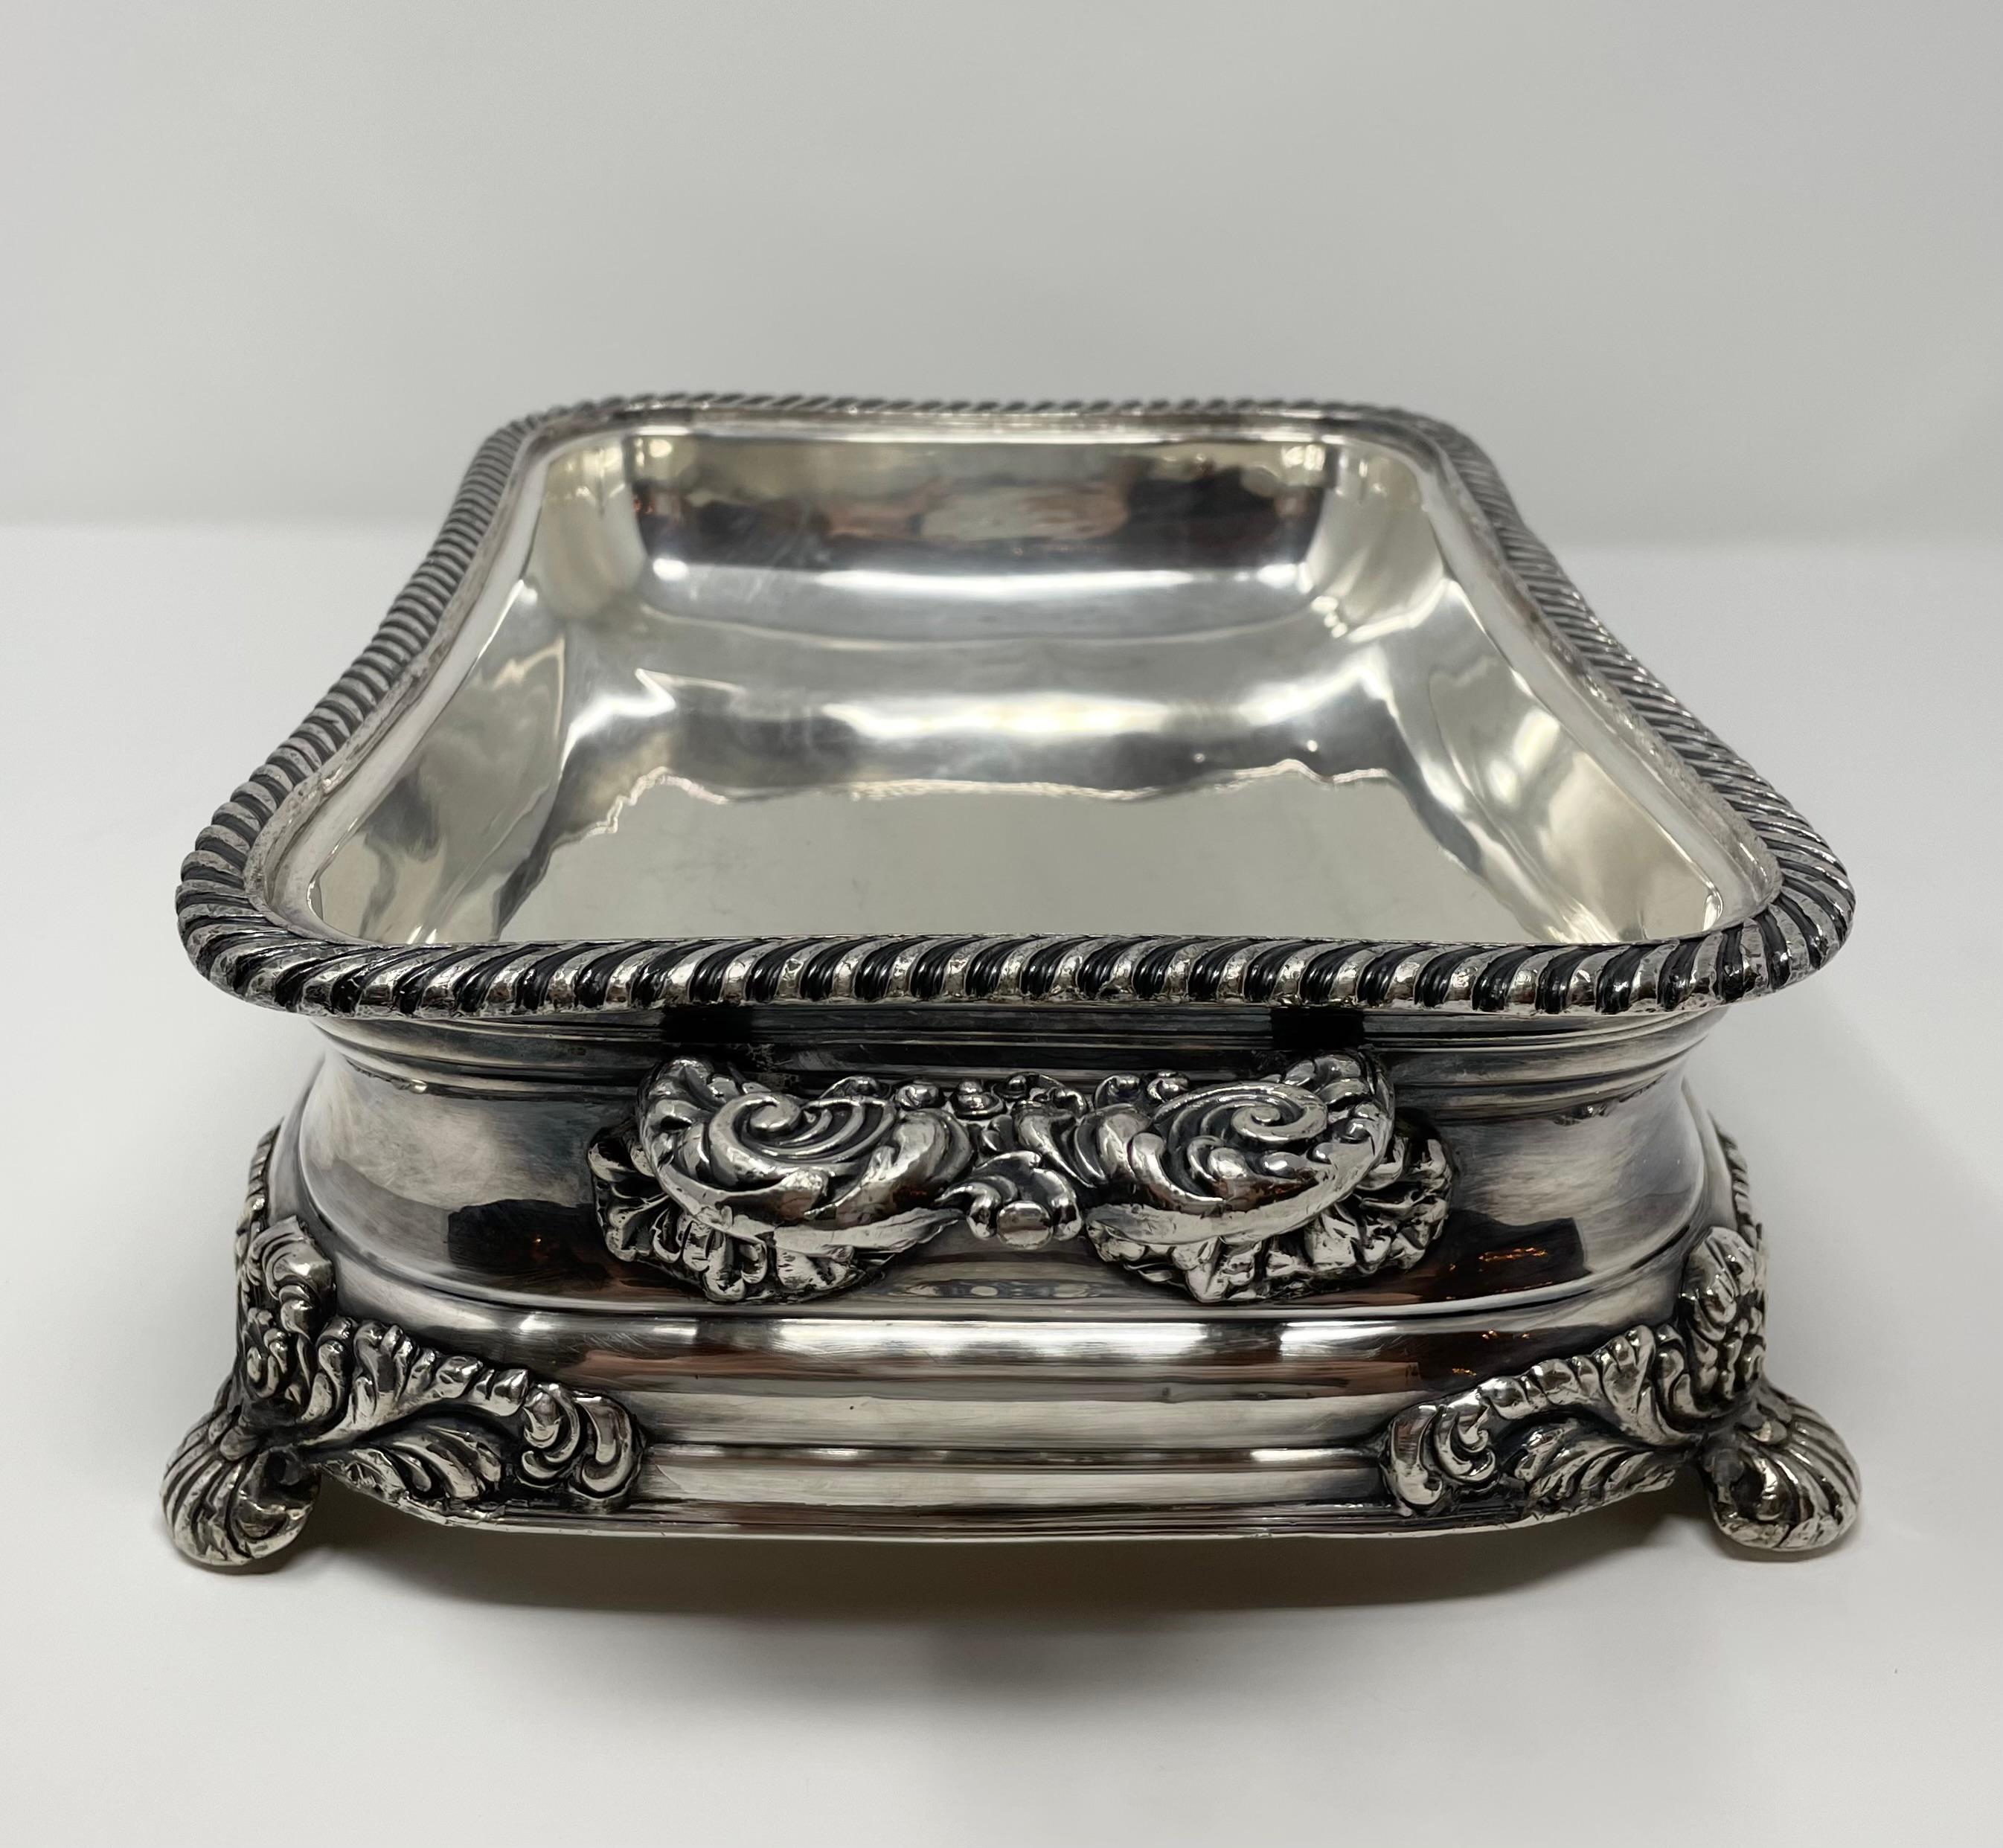 19th Century Pair of Antique English Silver Plated Entree Dishes, circa 1830-40